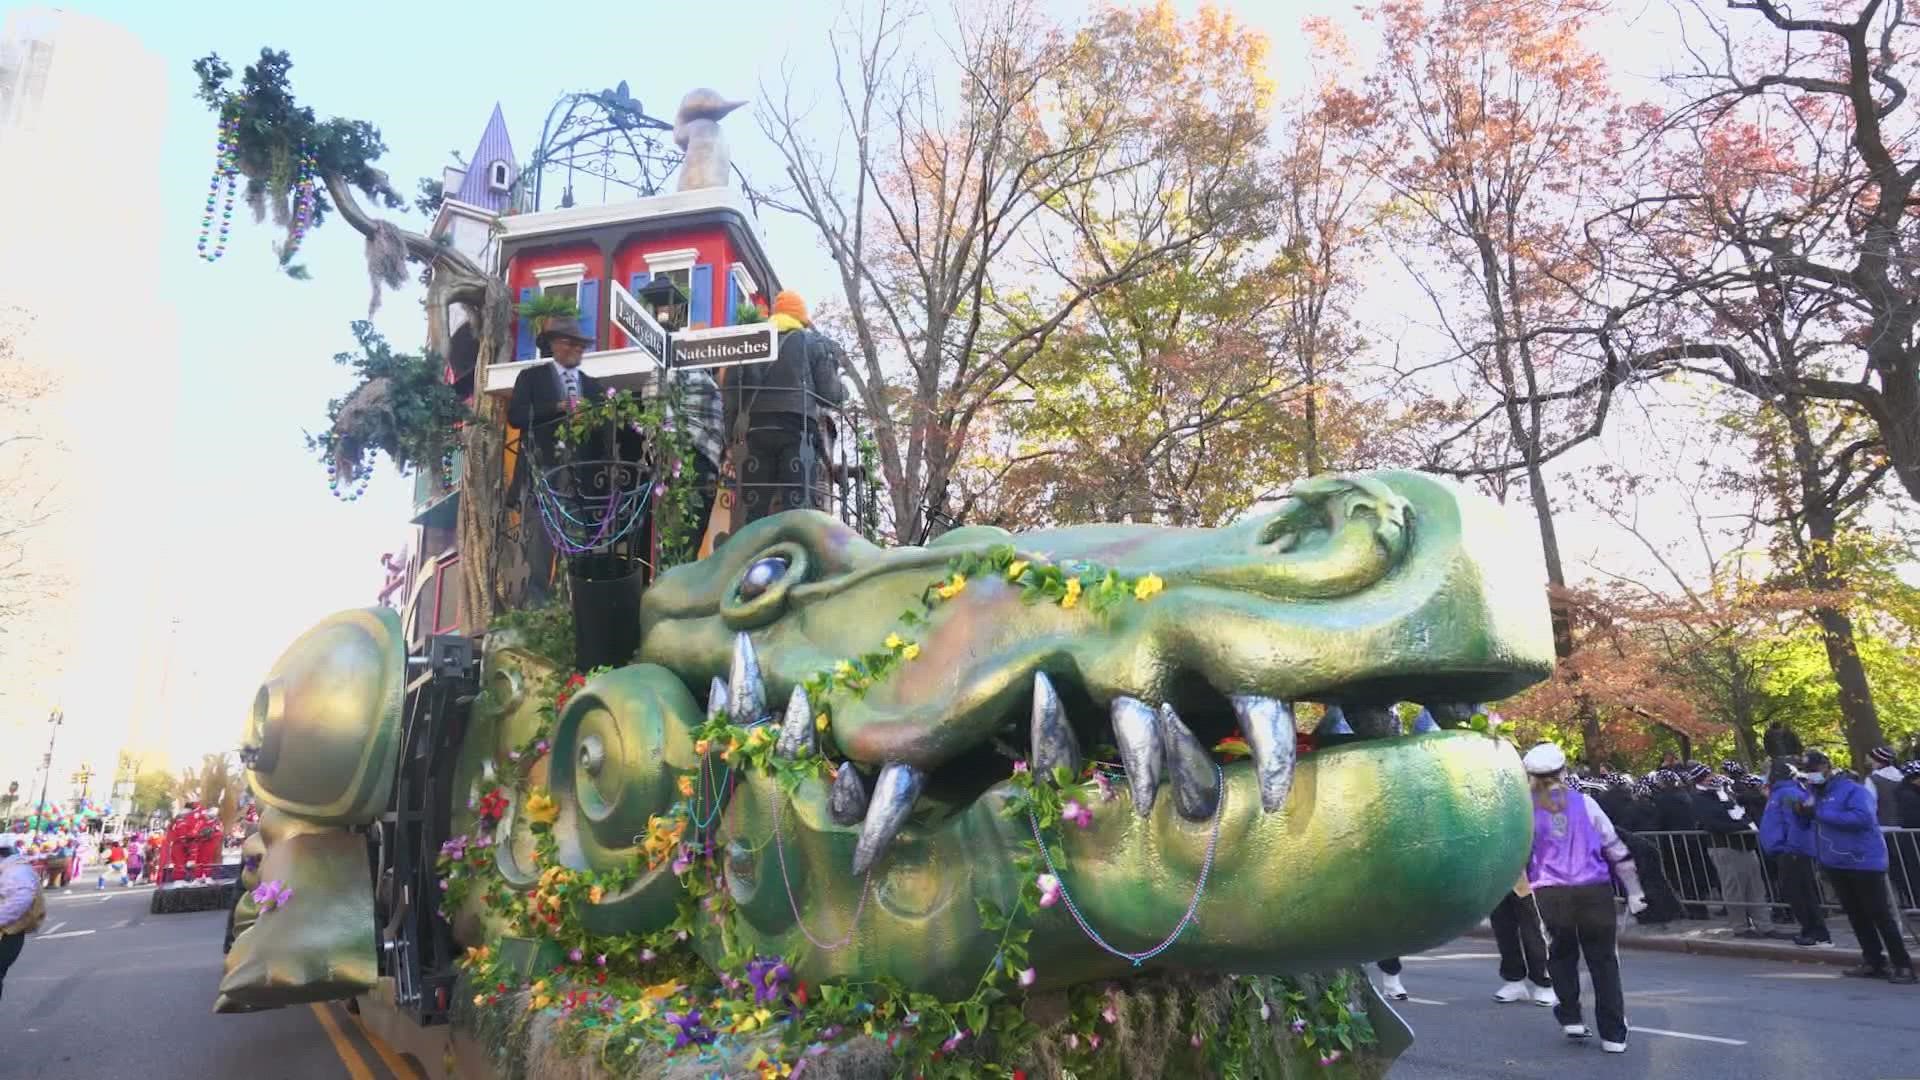 Float number 12 of 31 is the Celebration Gator, sponsored by the Louisiana Office of Tourism